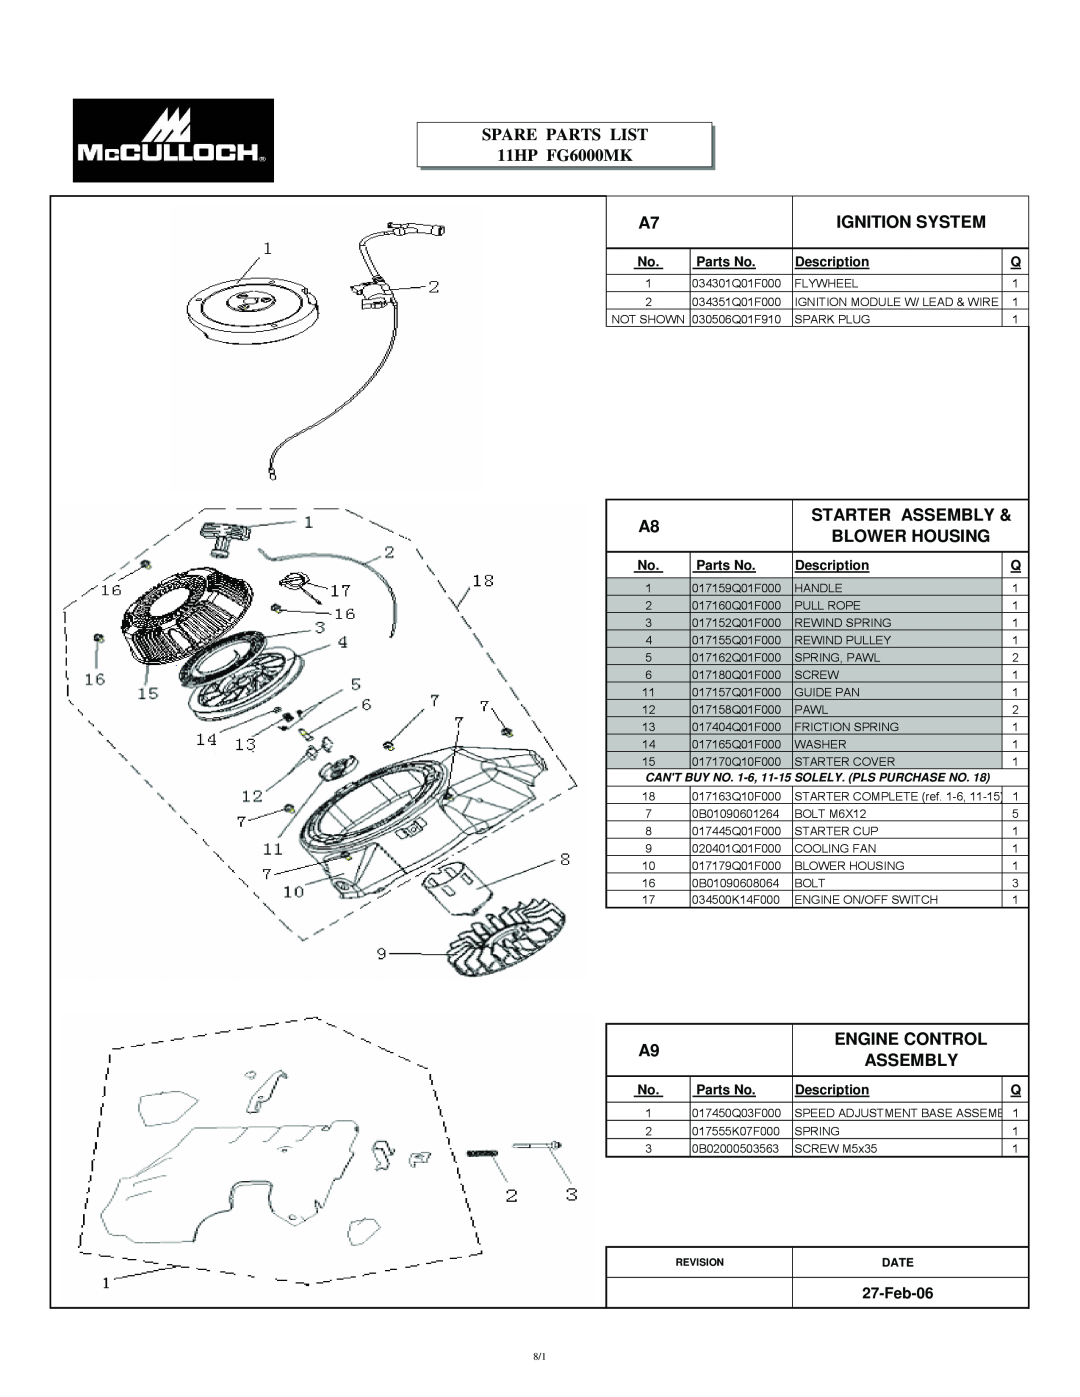 McCulloch FG6000MKUD-C manual Starter Assembly & Blower Housing, Engine Control Assembly, Ignition System, Feb-06, Parts No 